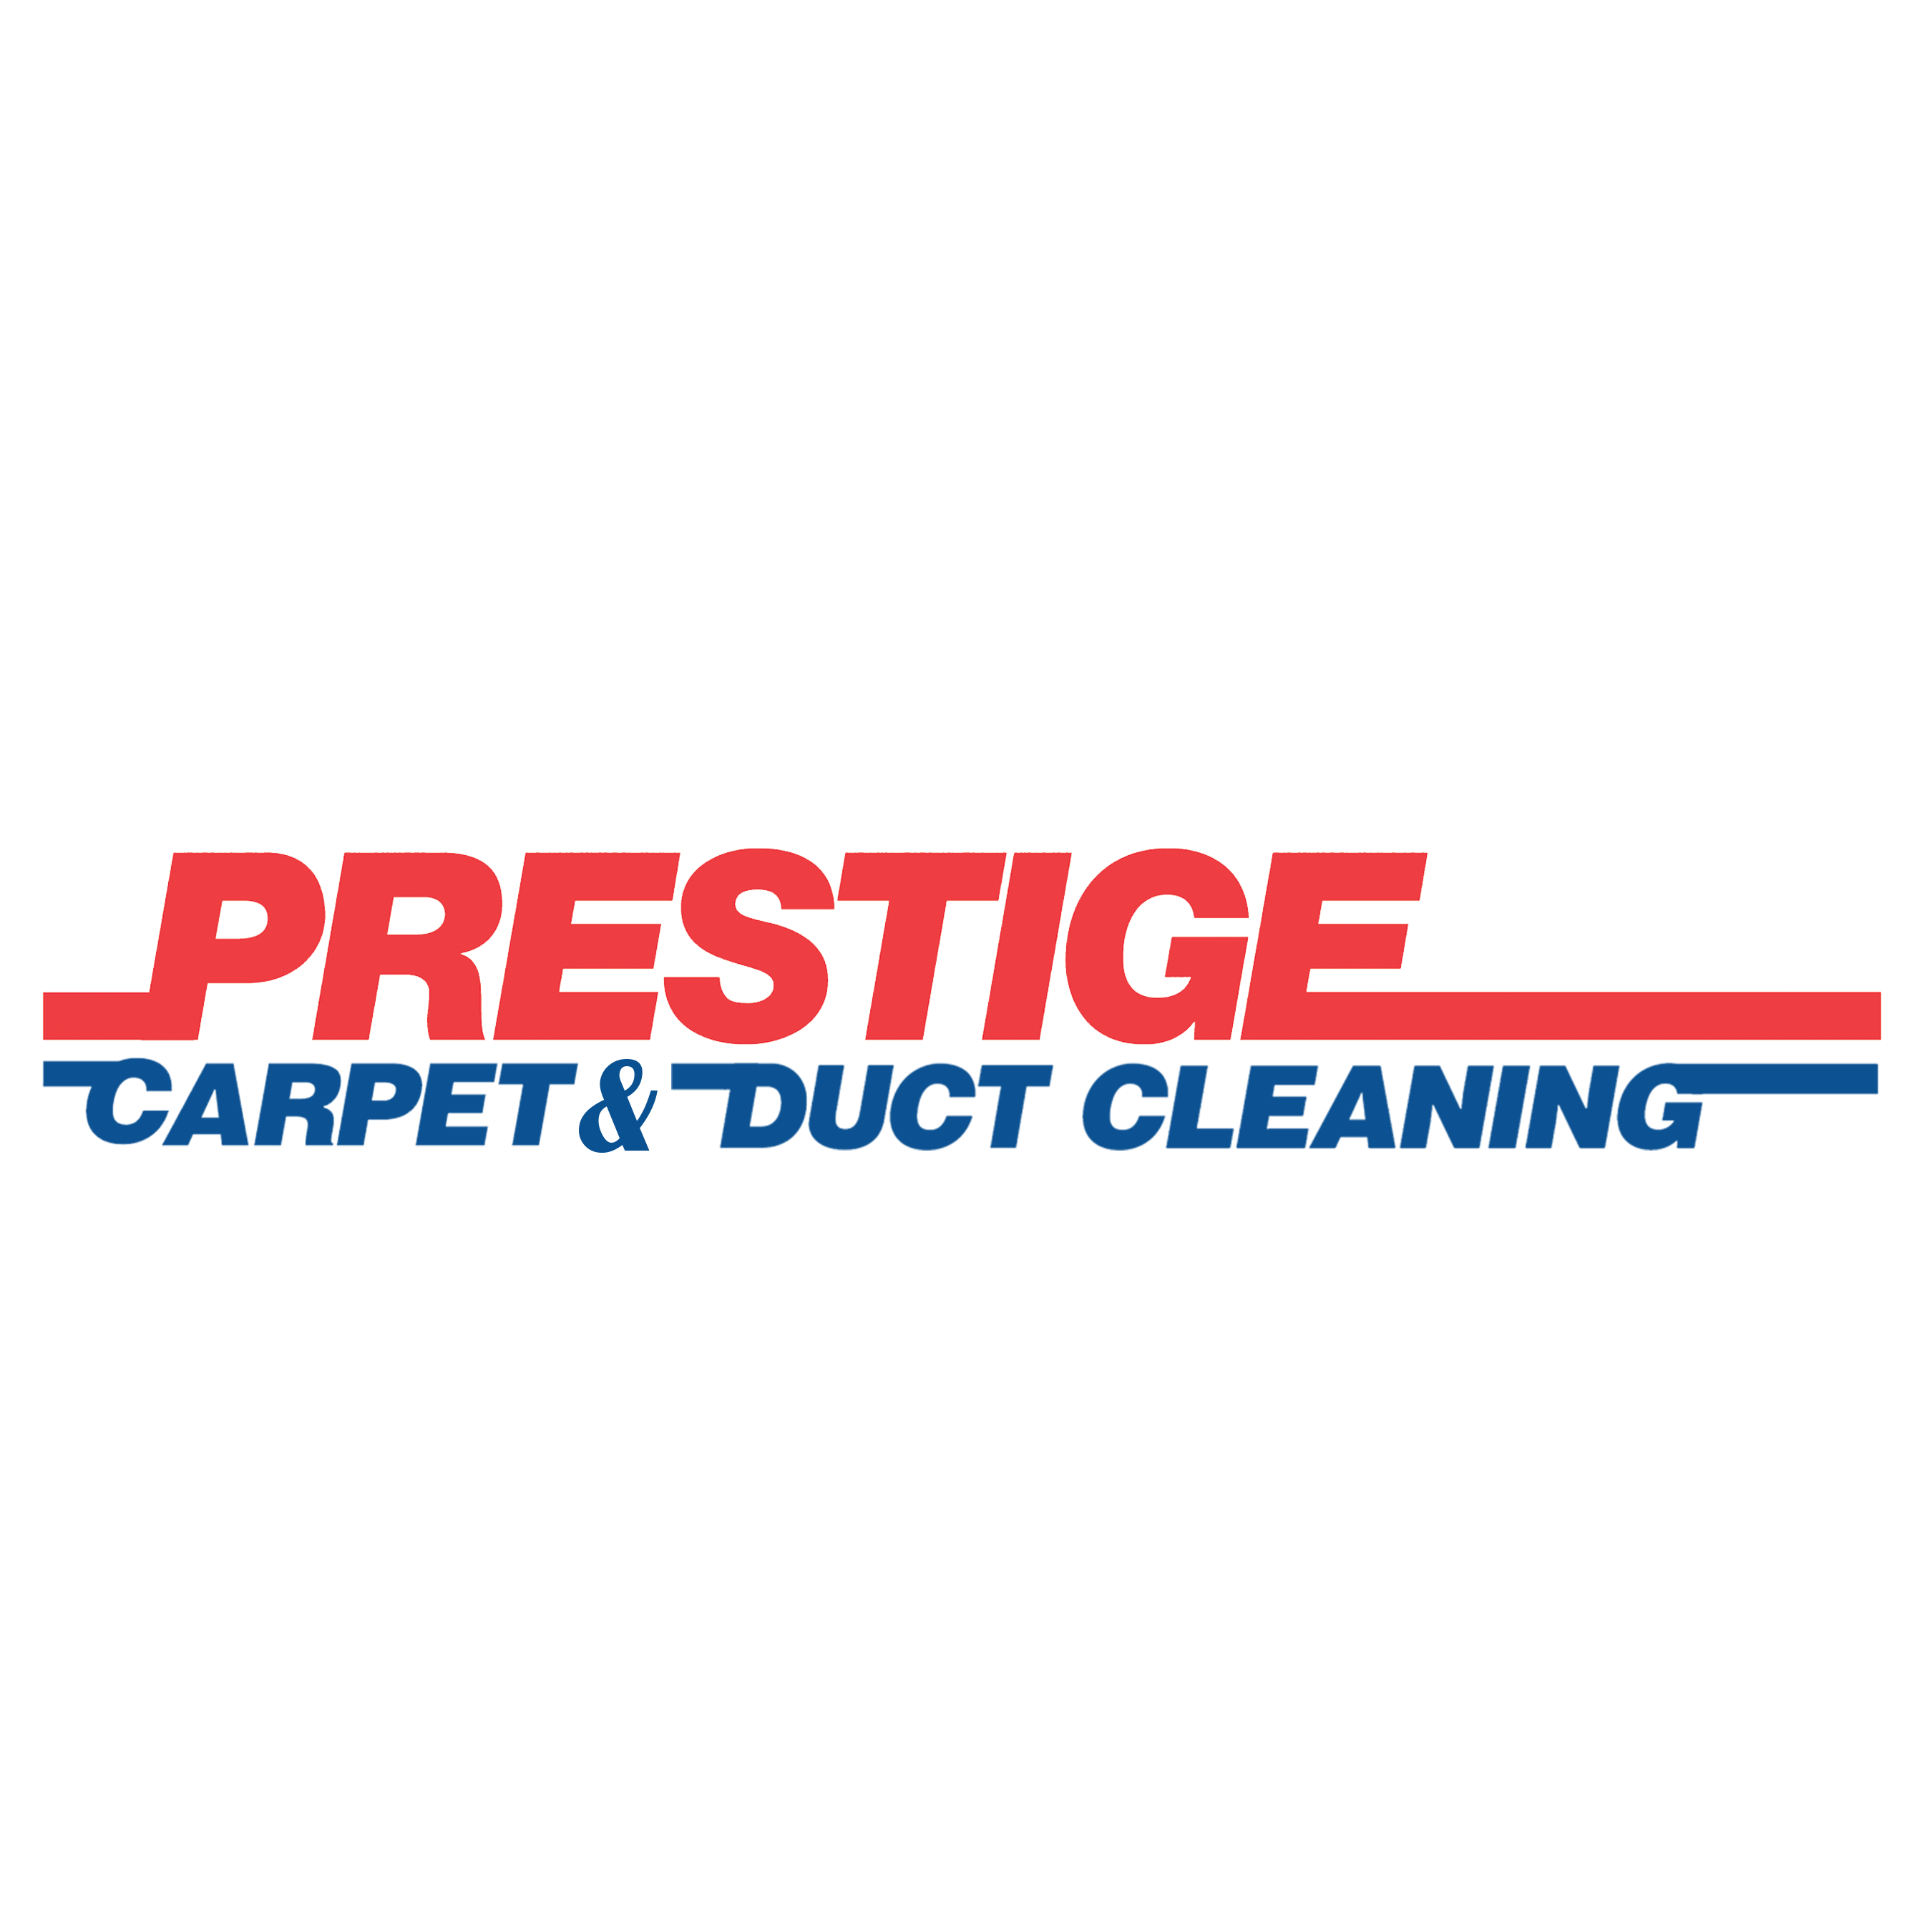 Prestige Carpet And Duct Cleaning